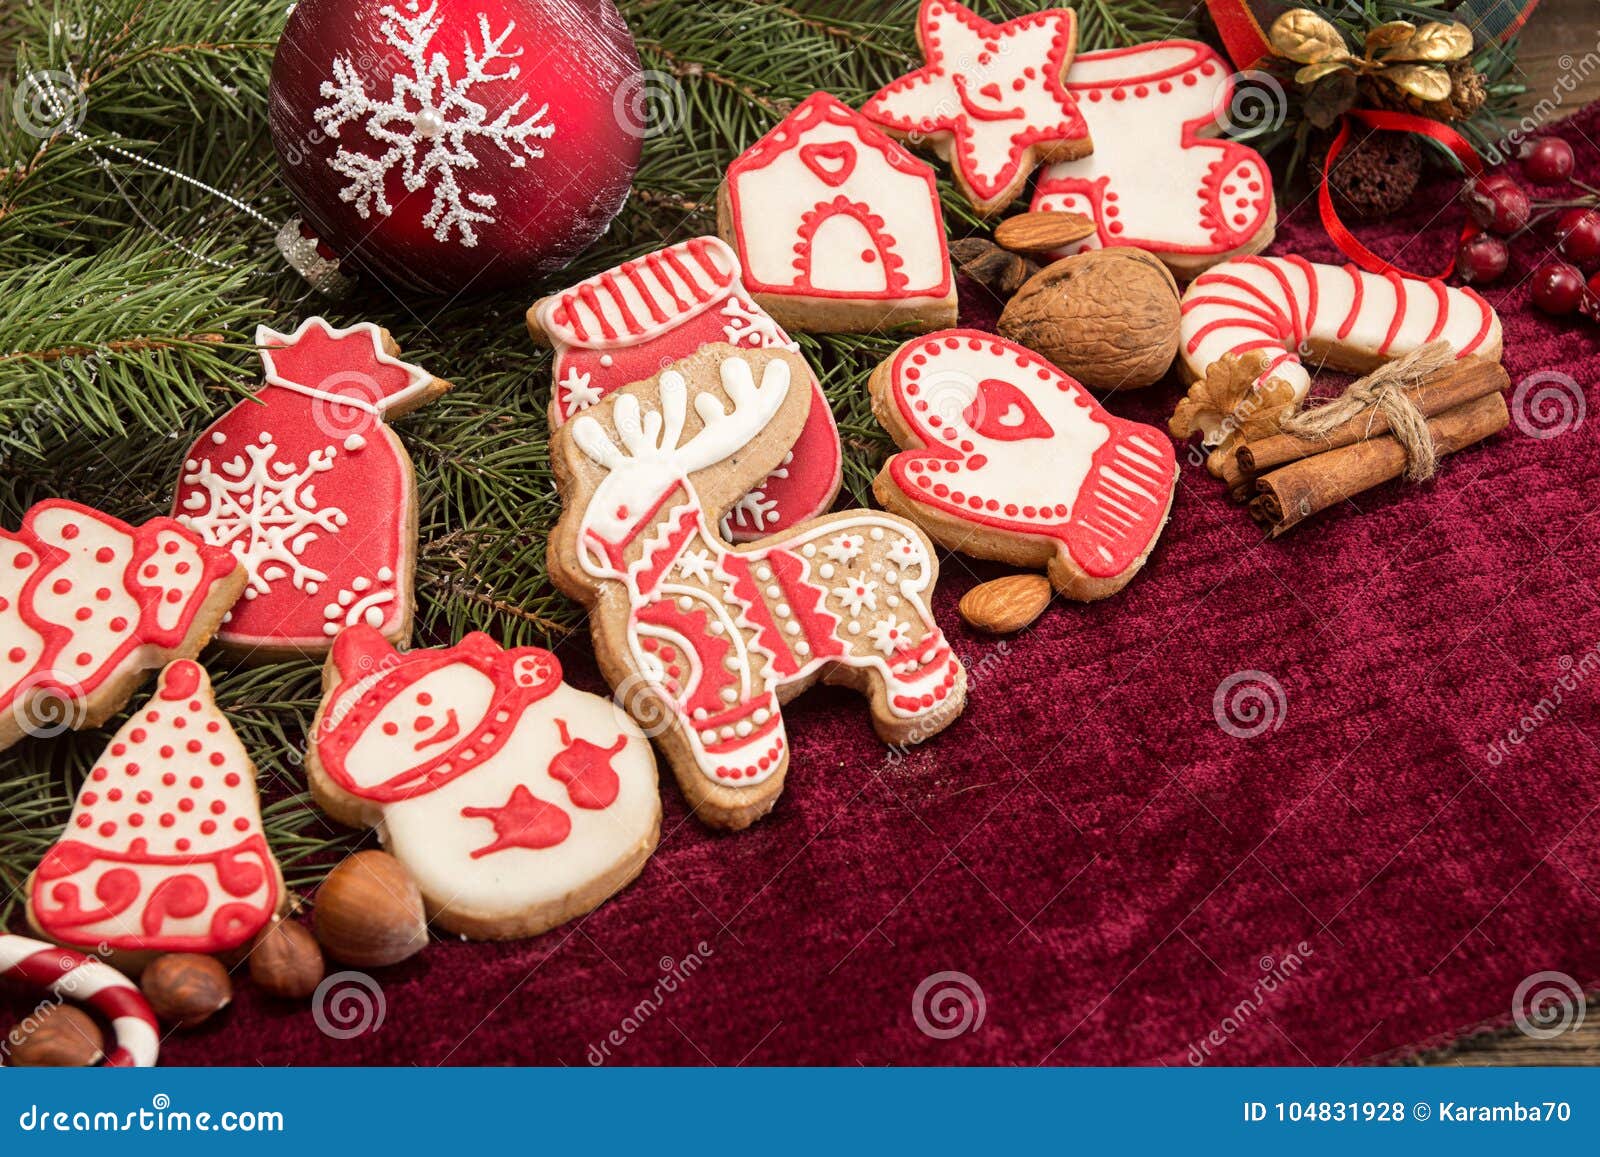 Gingerbread Cookies. Christmas New Year Holiday Decoration Stock Photo ...